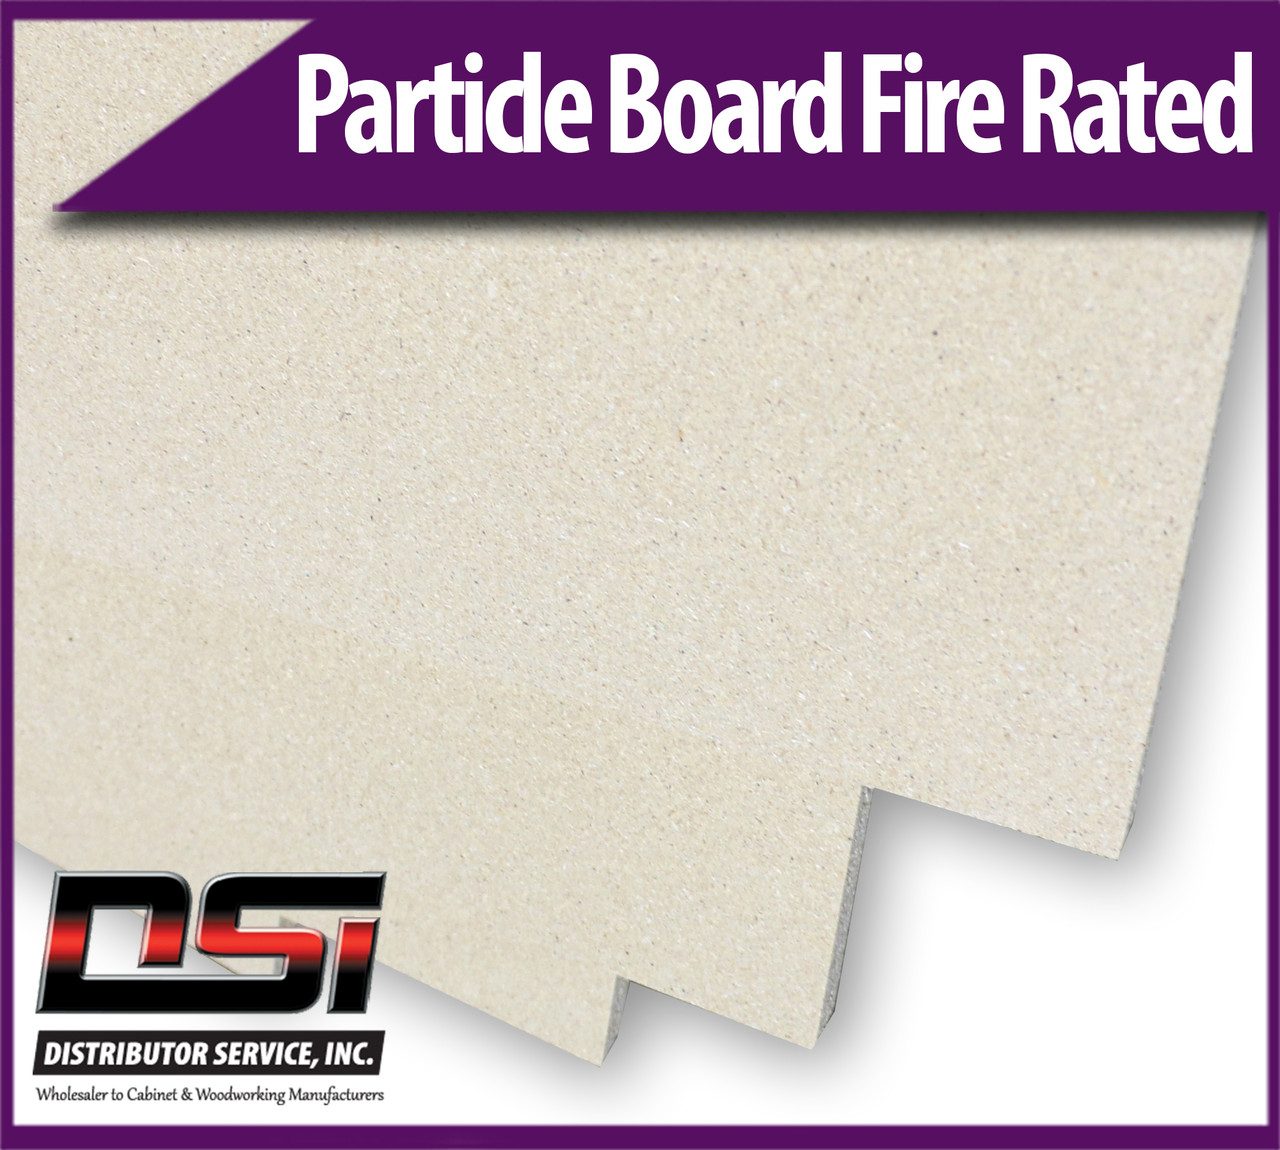 Particle Board Core Fire Rated 1/2" x 49" x 145" Industrial Particleboard Panels